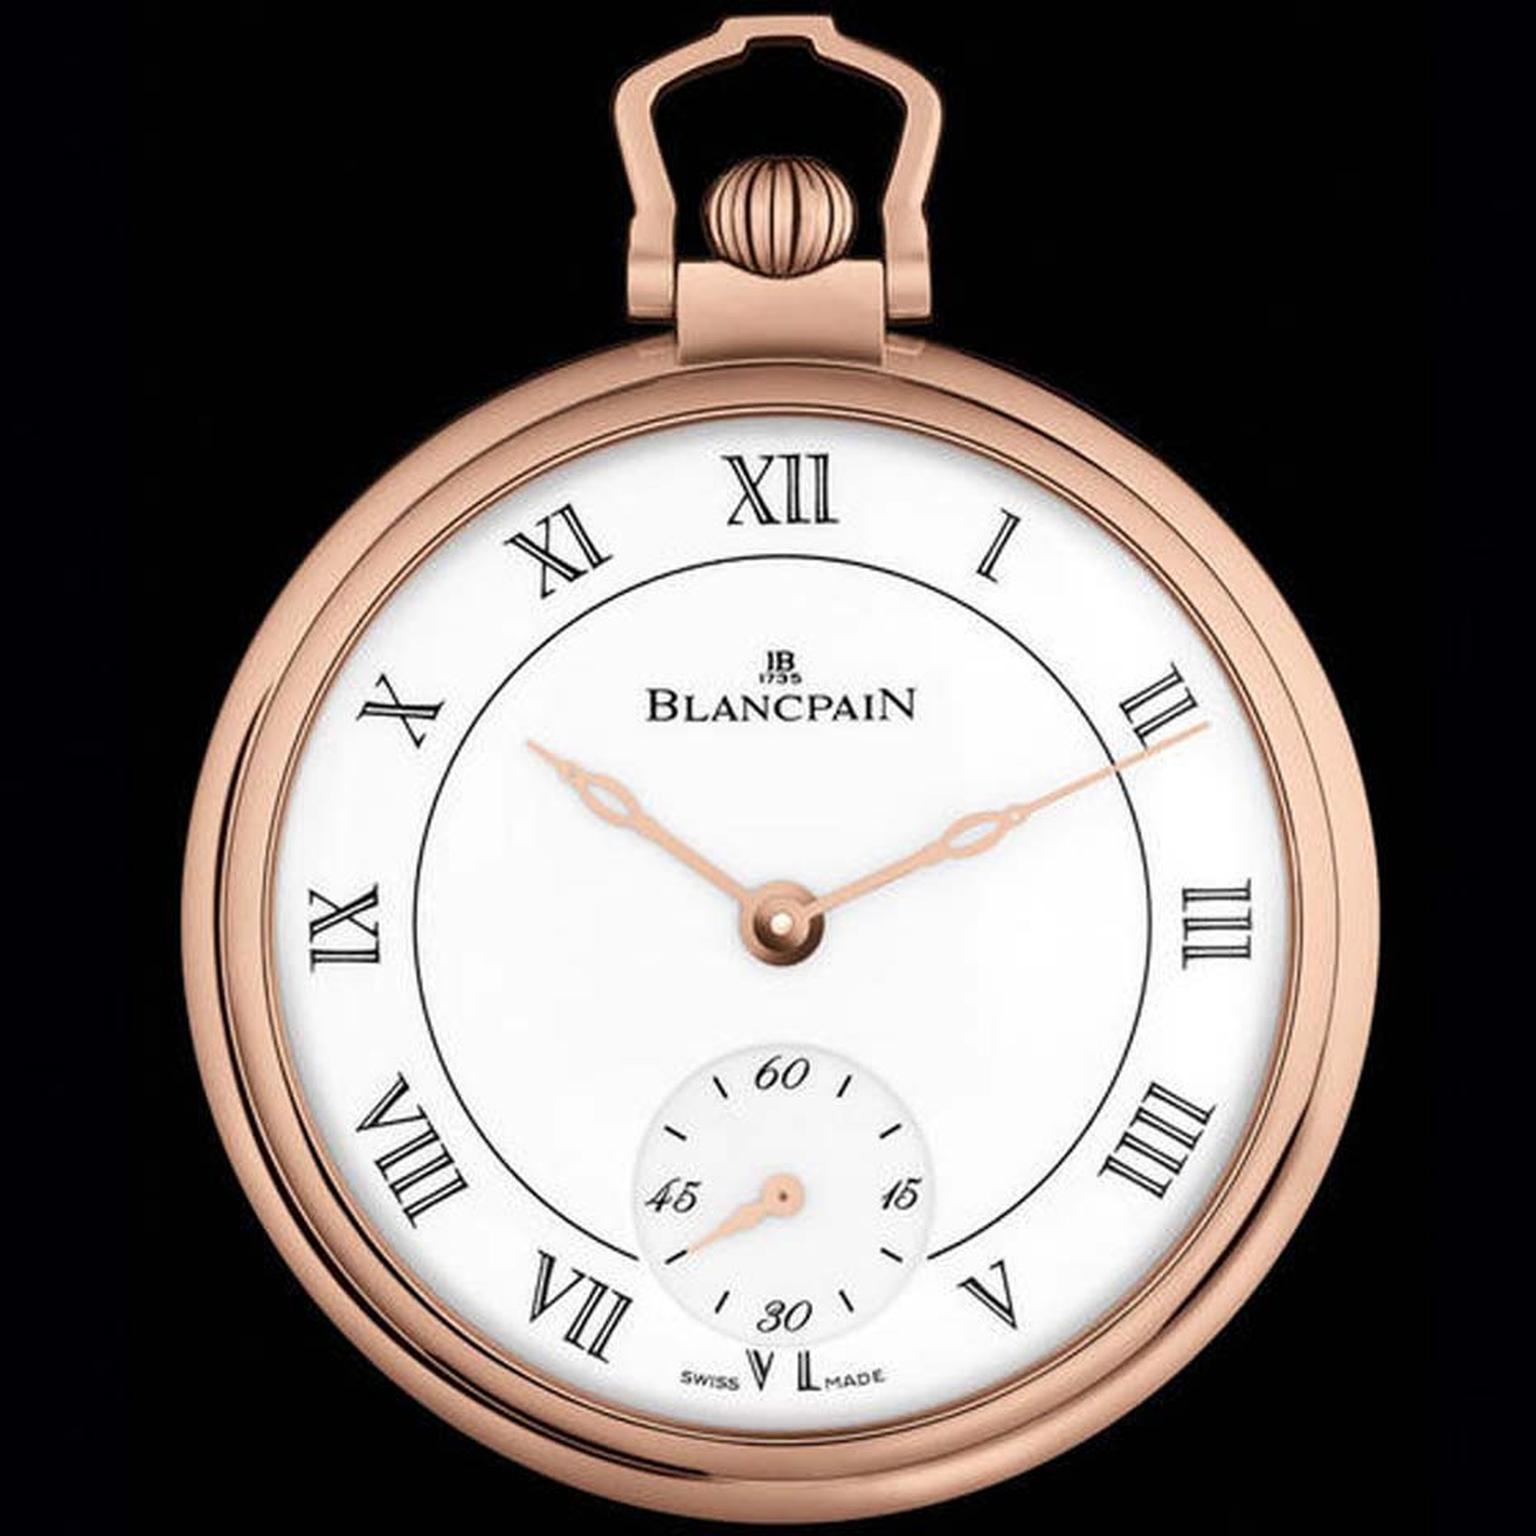 Blancpain Villeret pocket watch for men featuring a red gold 44.5mm case, a beautiful grand feu enamel dial and an ultra-slim movement.